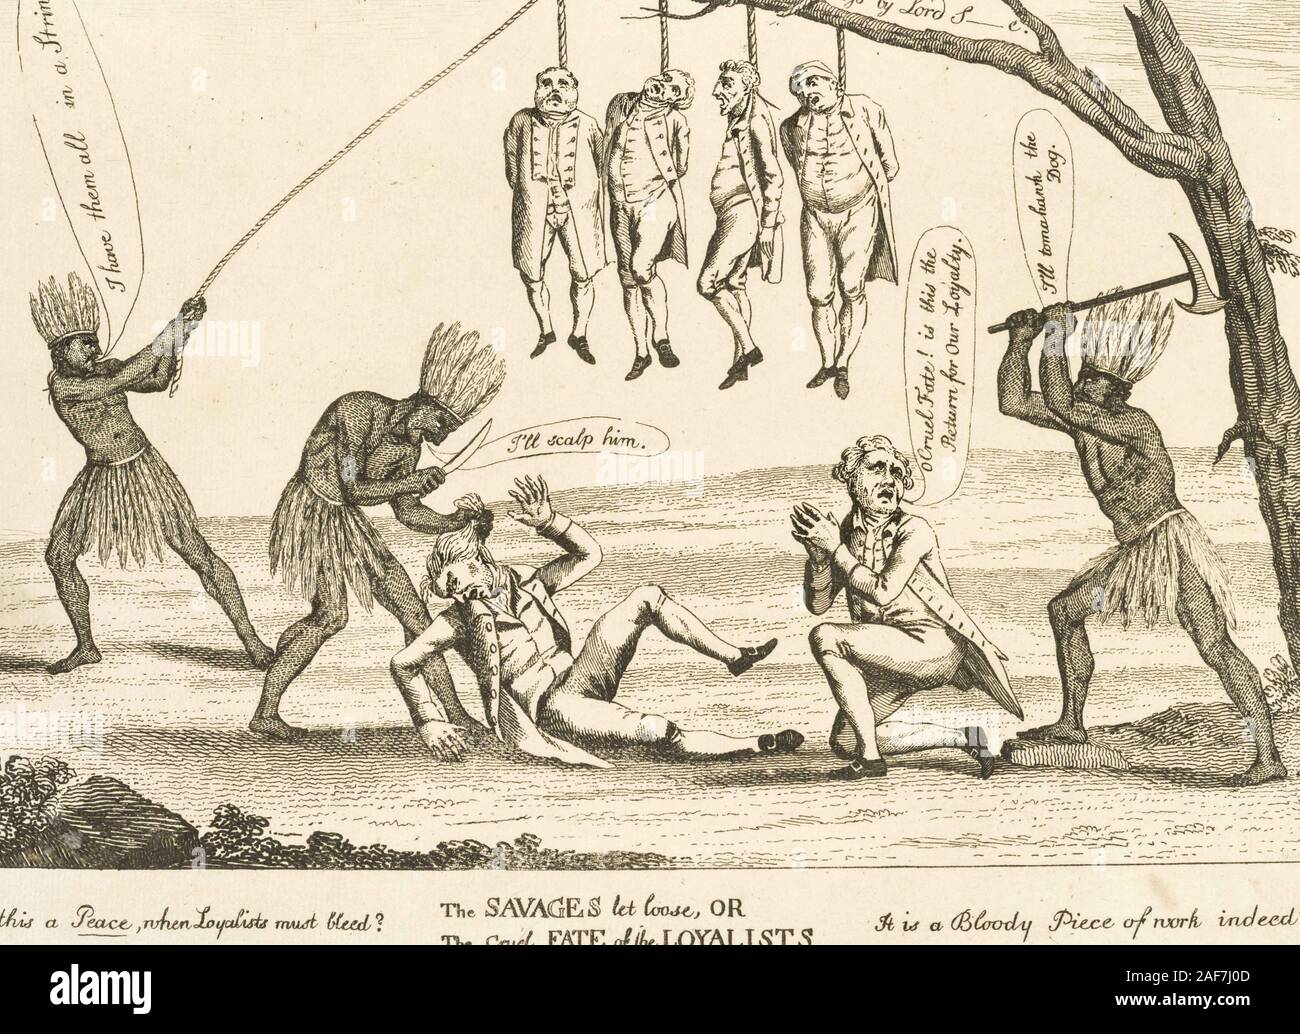 The savages let loose, or The cruel fate of the Loyalists. Cartoon shows three Natives, representing America, murdering six loyalists, four are being hung, one is about to be scalped, and the last, appealing to Fate, is about to be killed by an ax-wielding Native. William Humphrey Stock Photo